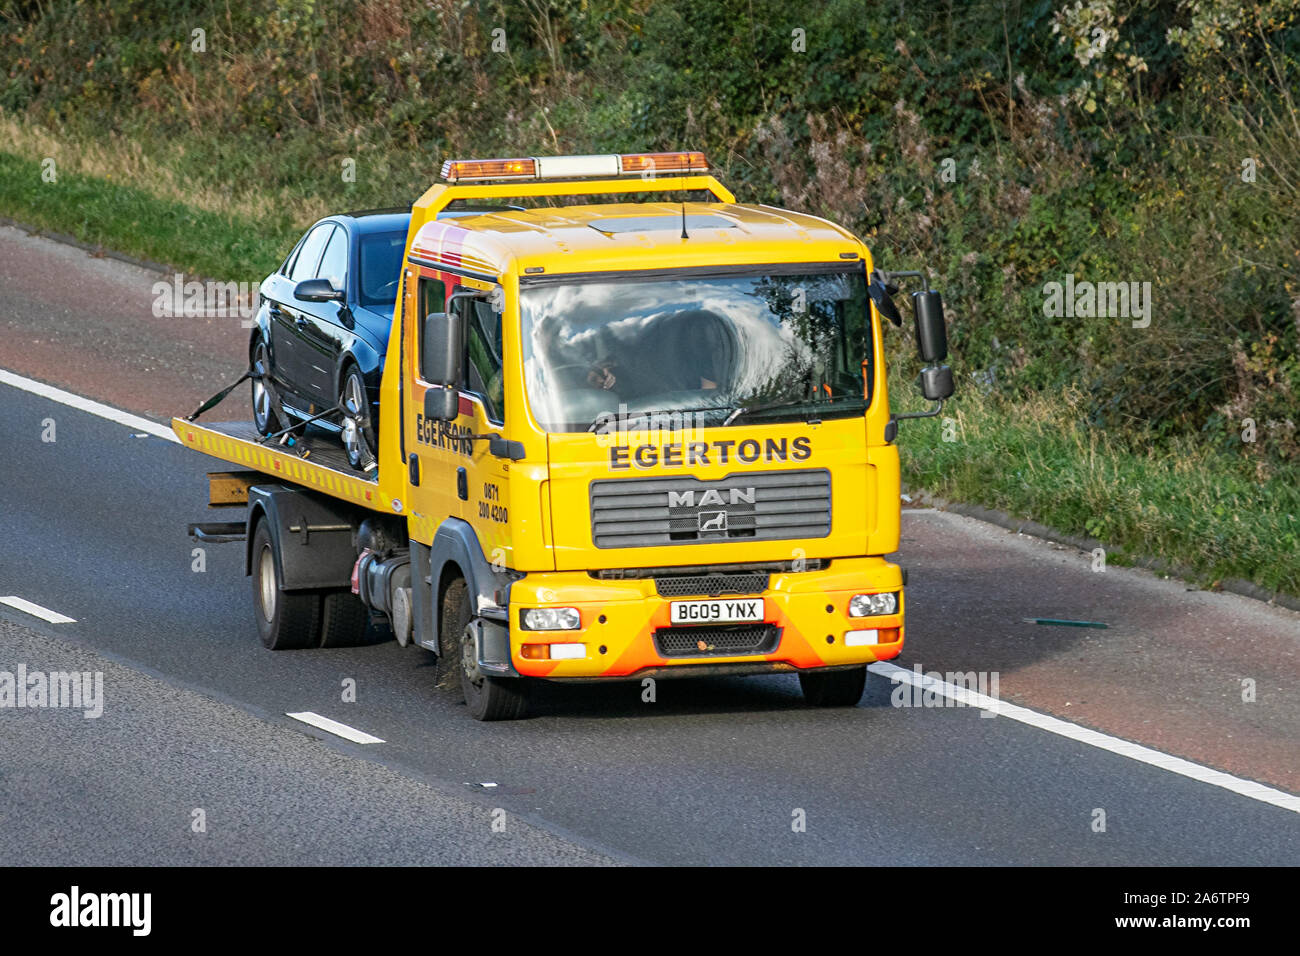 Egertons Breakdon Recovery;  Haulage delivery trucks, lorry, transportation, truck, cargo, MAN vehicle, delivery, commercial transport, industry, supply chain freight, on the M6 at Lancaster, UK Stock Photo